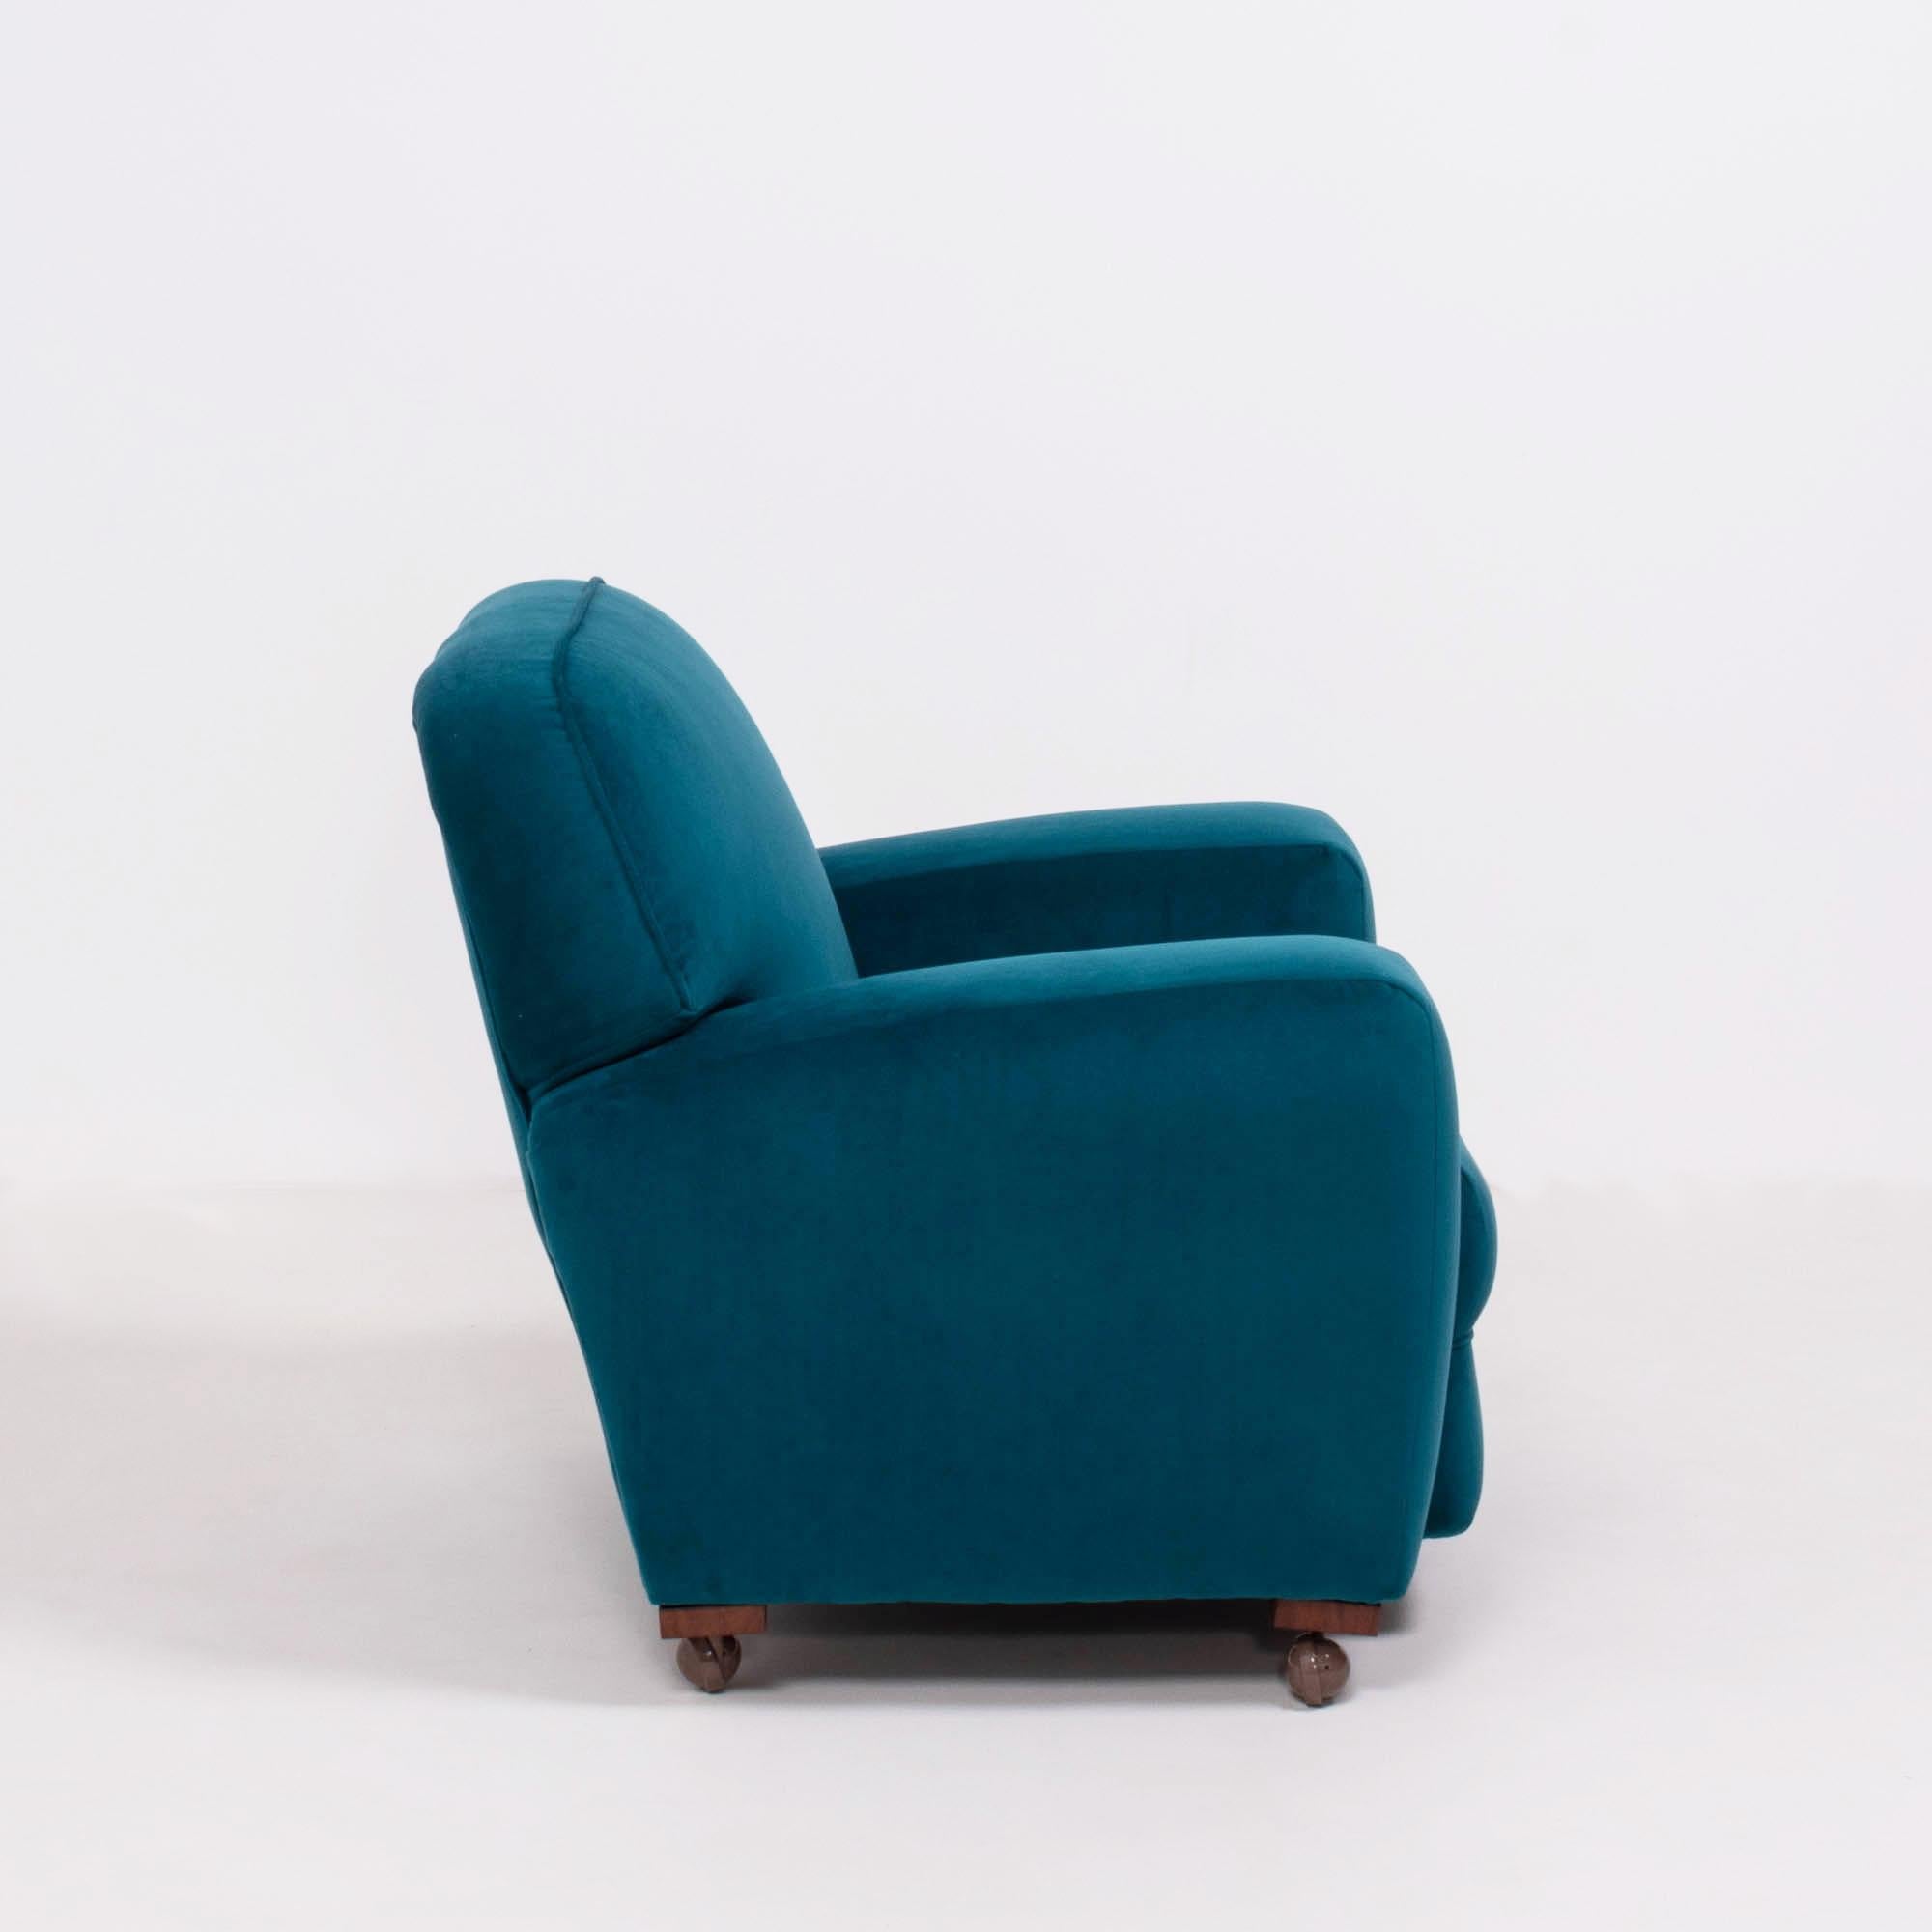 1930s Art Deco Curved Blue Teal Velvet Armchair In Excellent Condition In London, GB